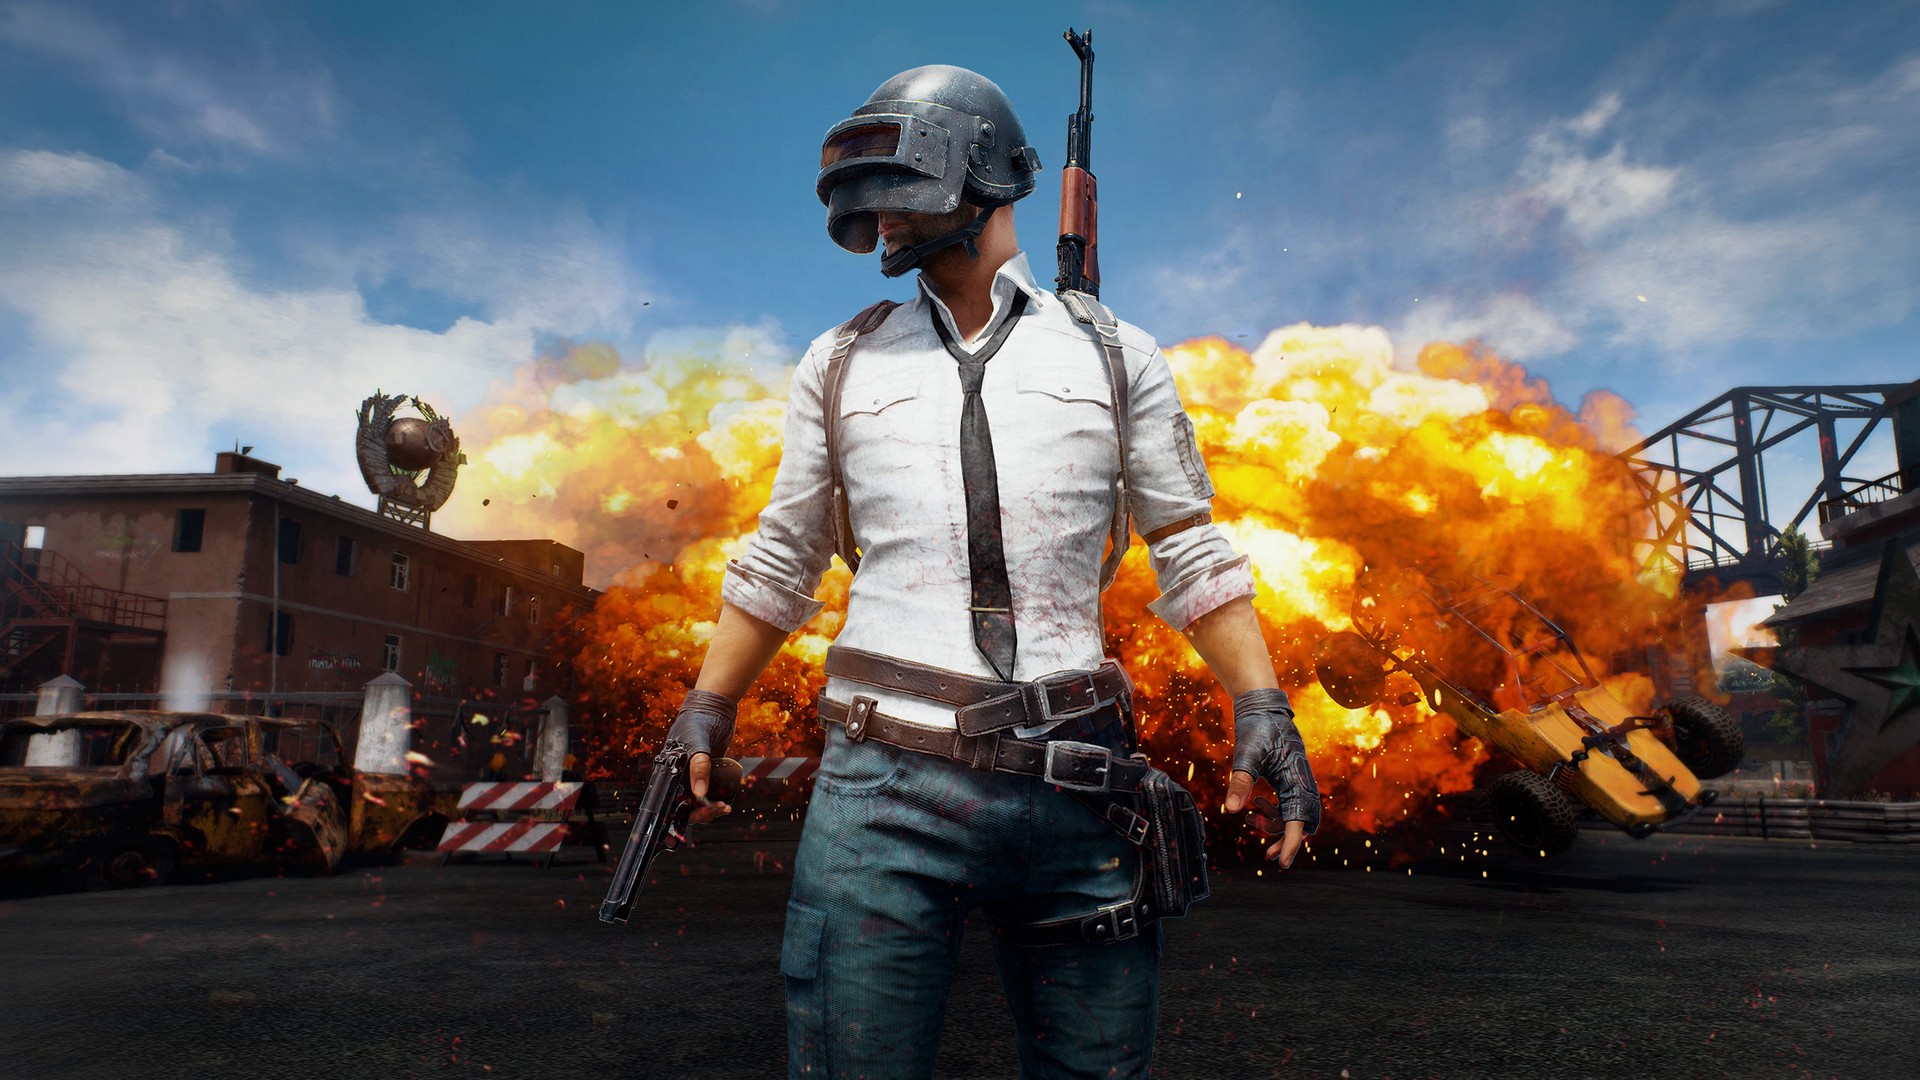 Wallpaper PUBG Desktop with resolution 1920X1080 pixel. You can use this wallpaper as background for your desktop Computer Screensavers, Android or iPhone smartphones